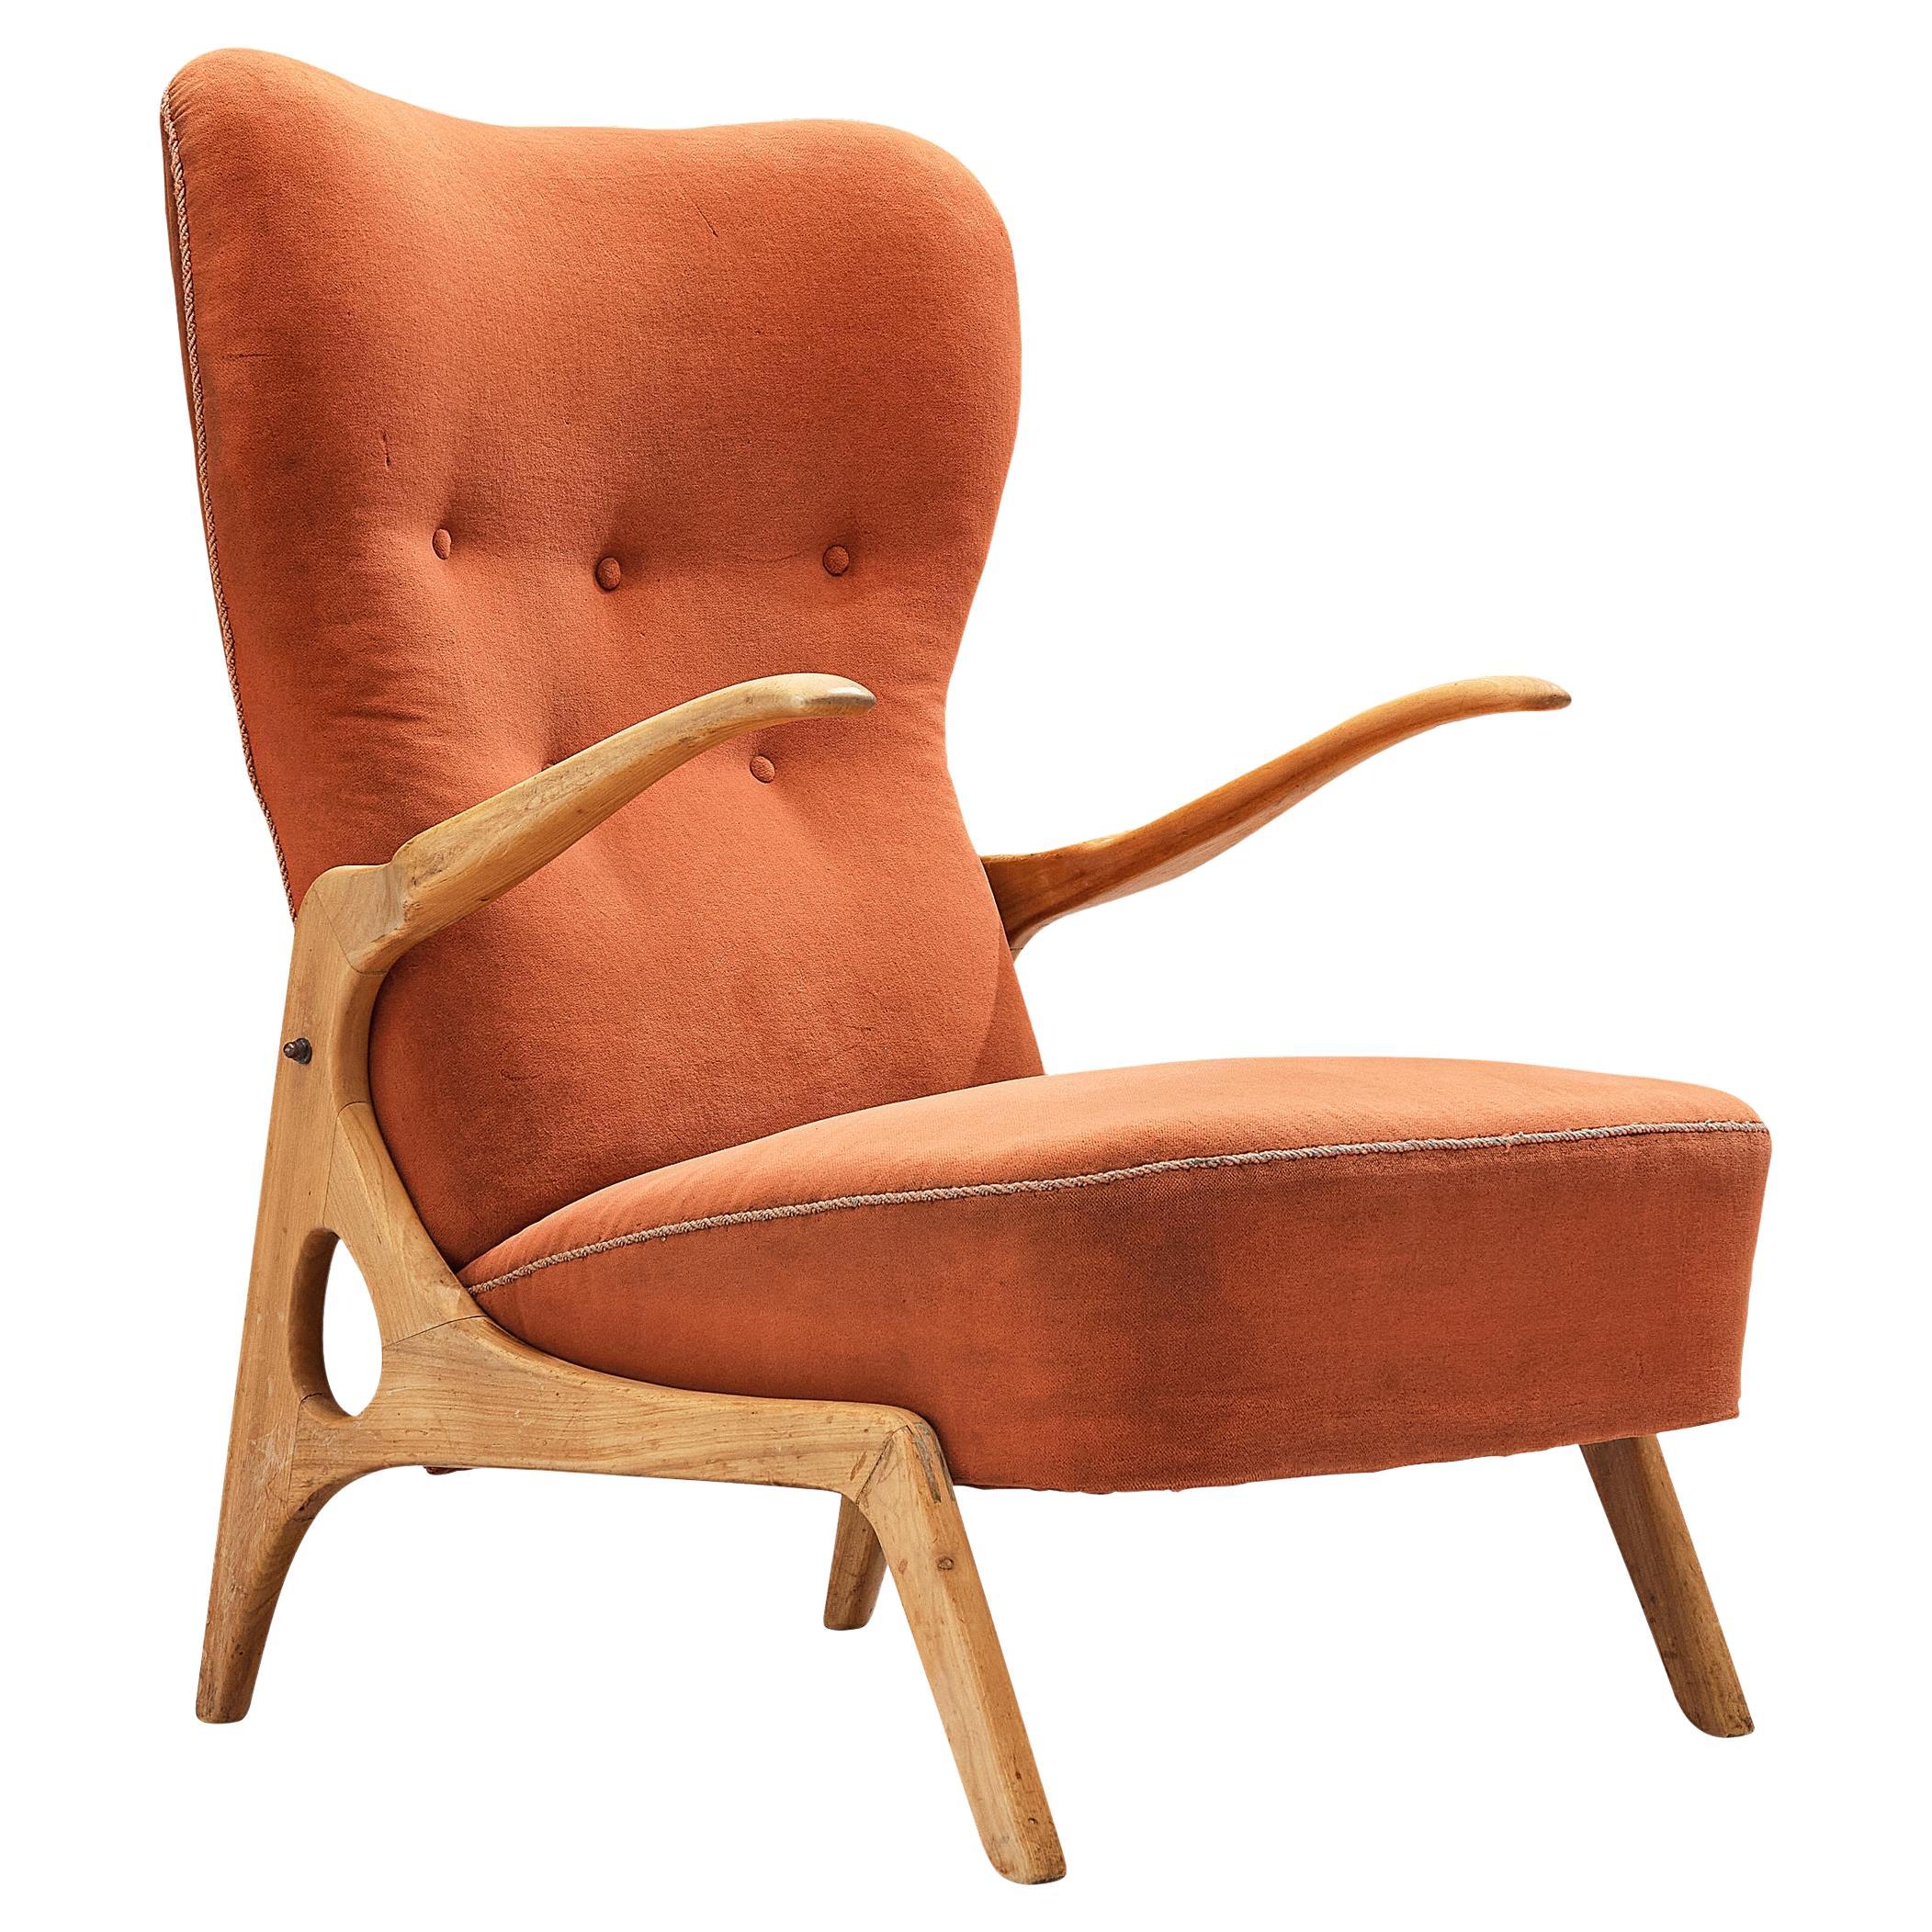 Italian Sculptural Lounge Chair in Cherry 